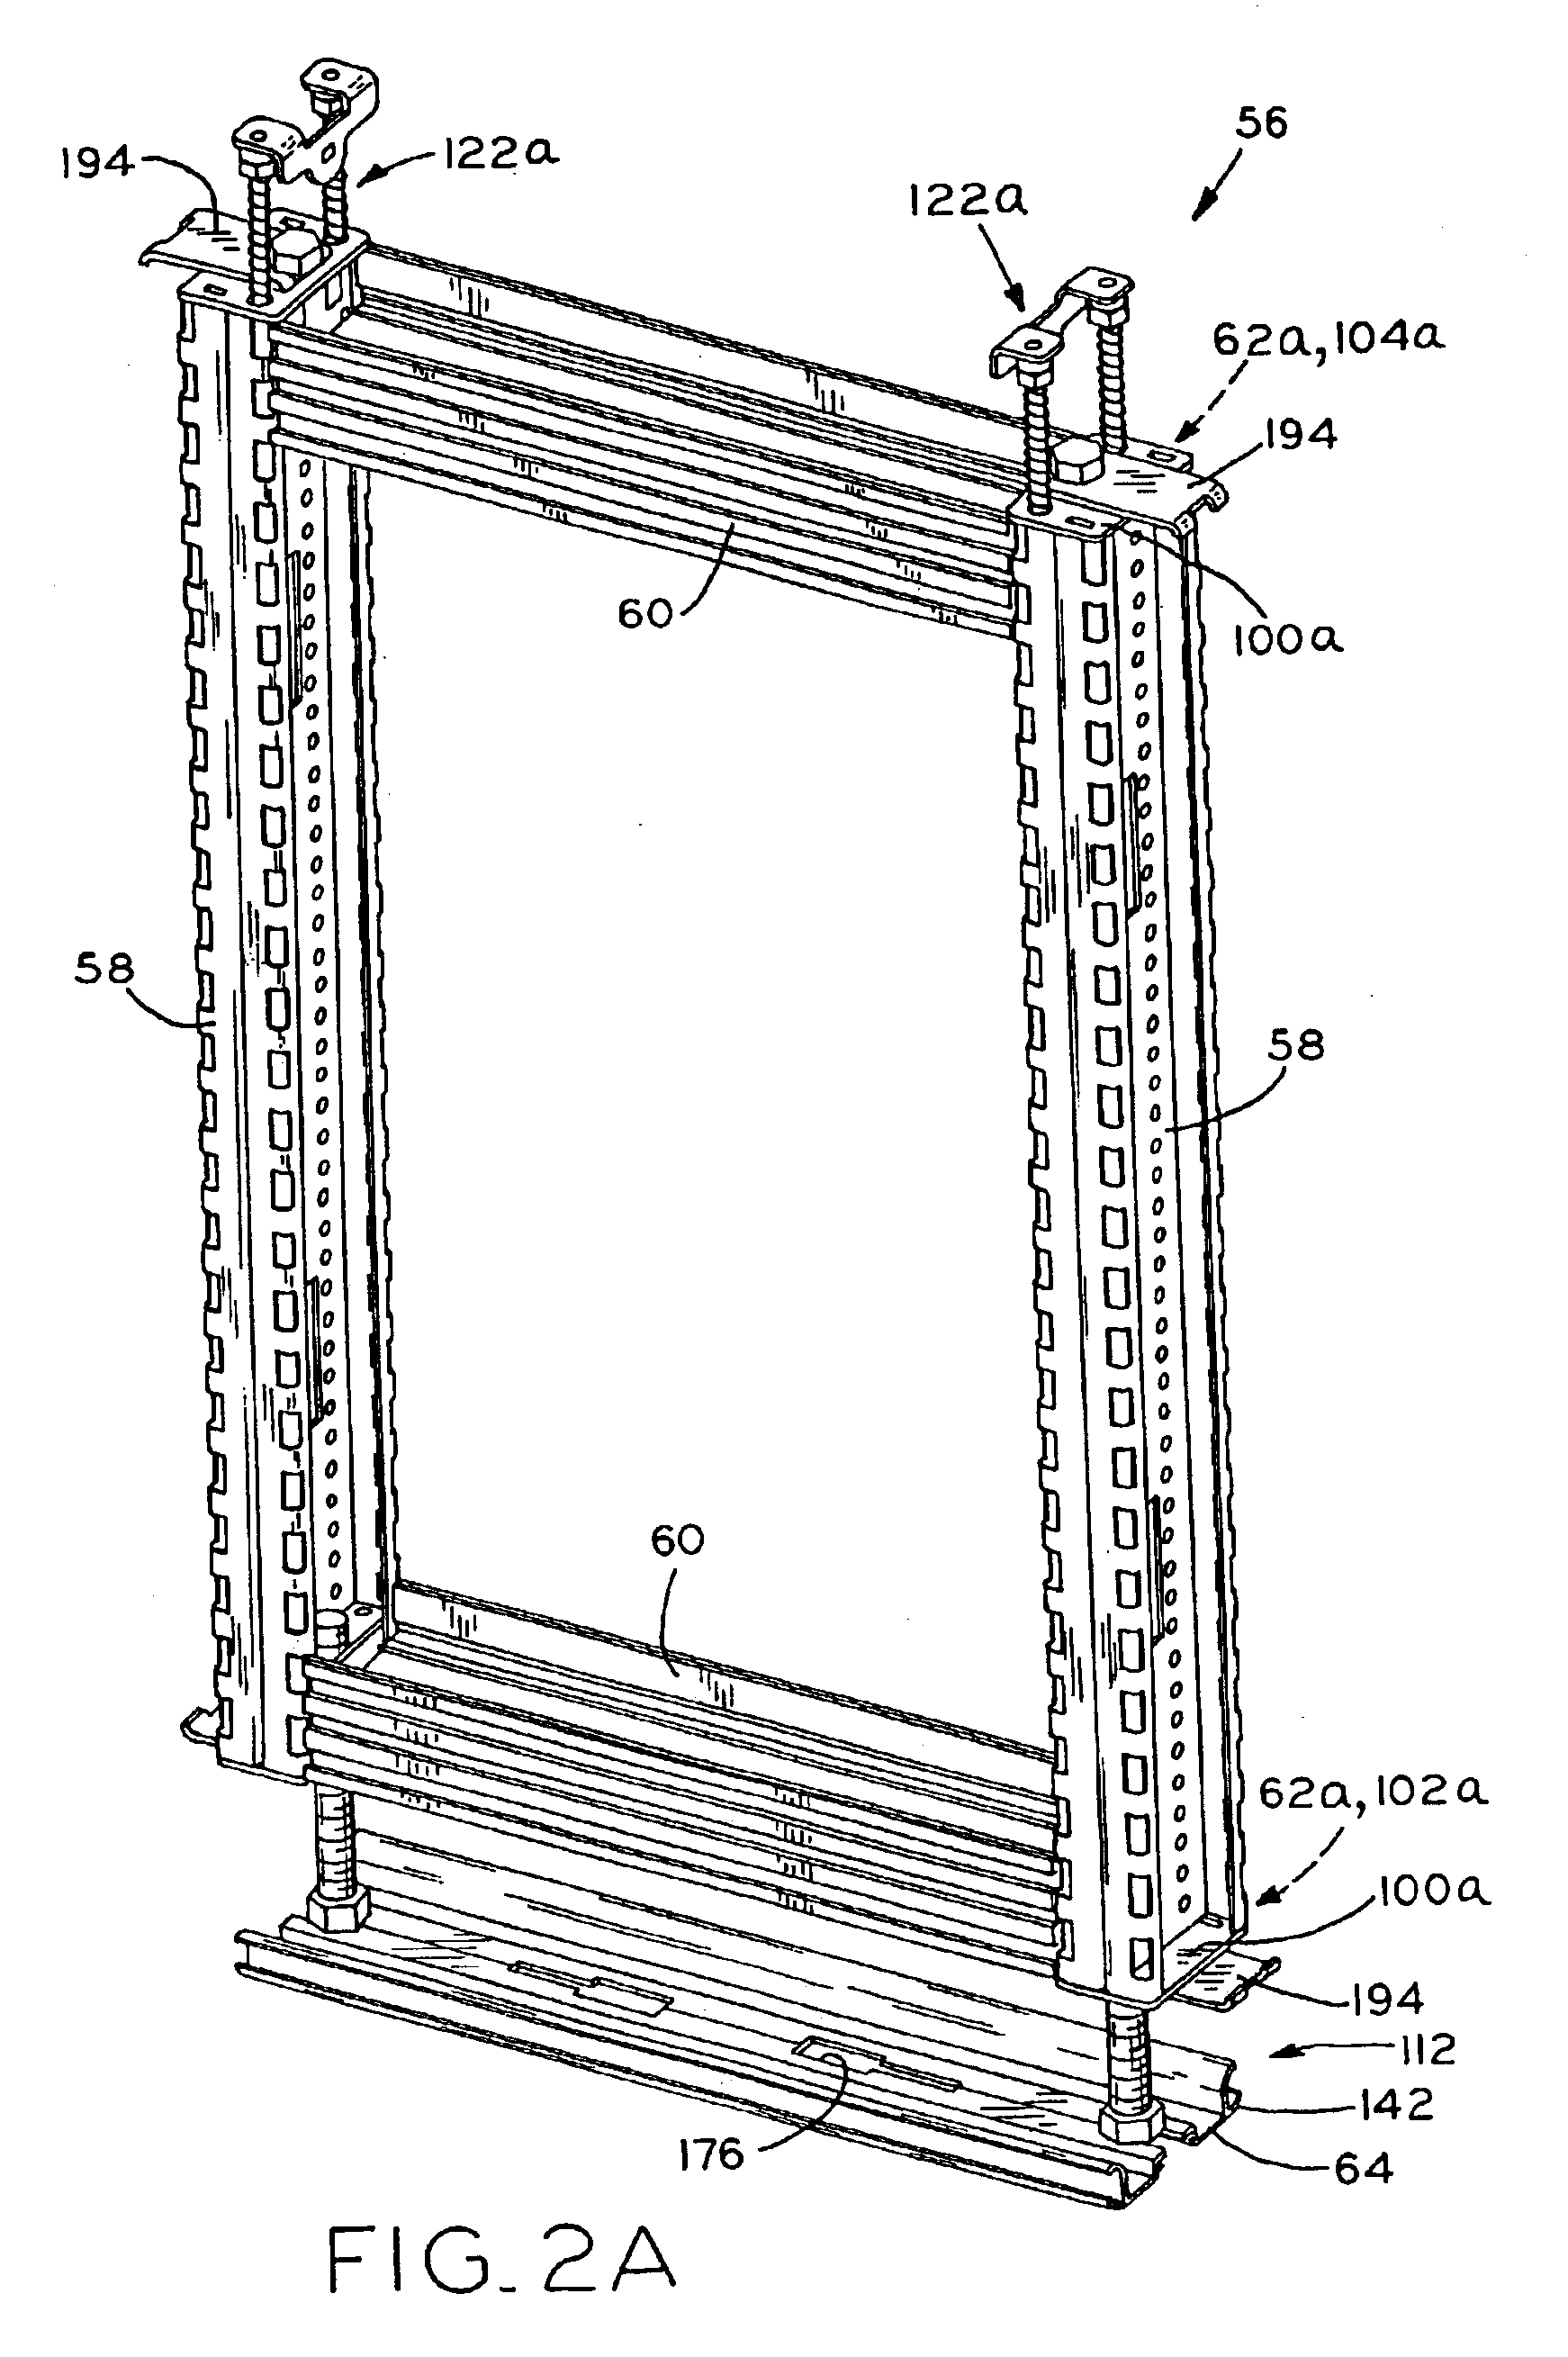 Floor-to-ceiling wall panel system